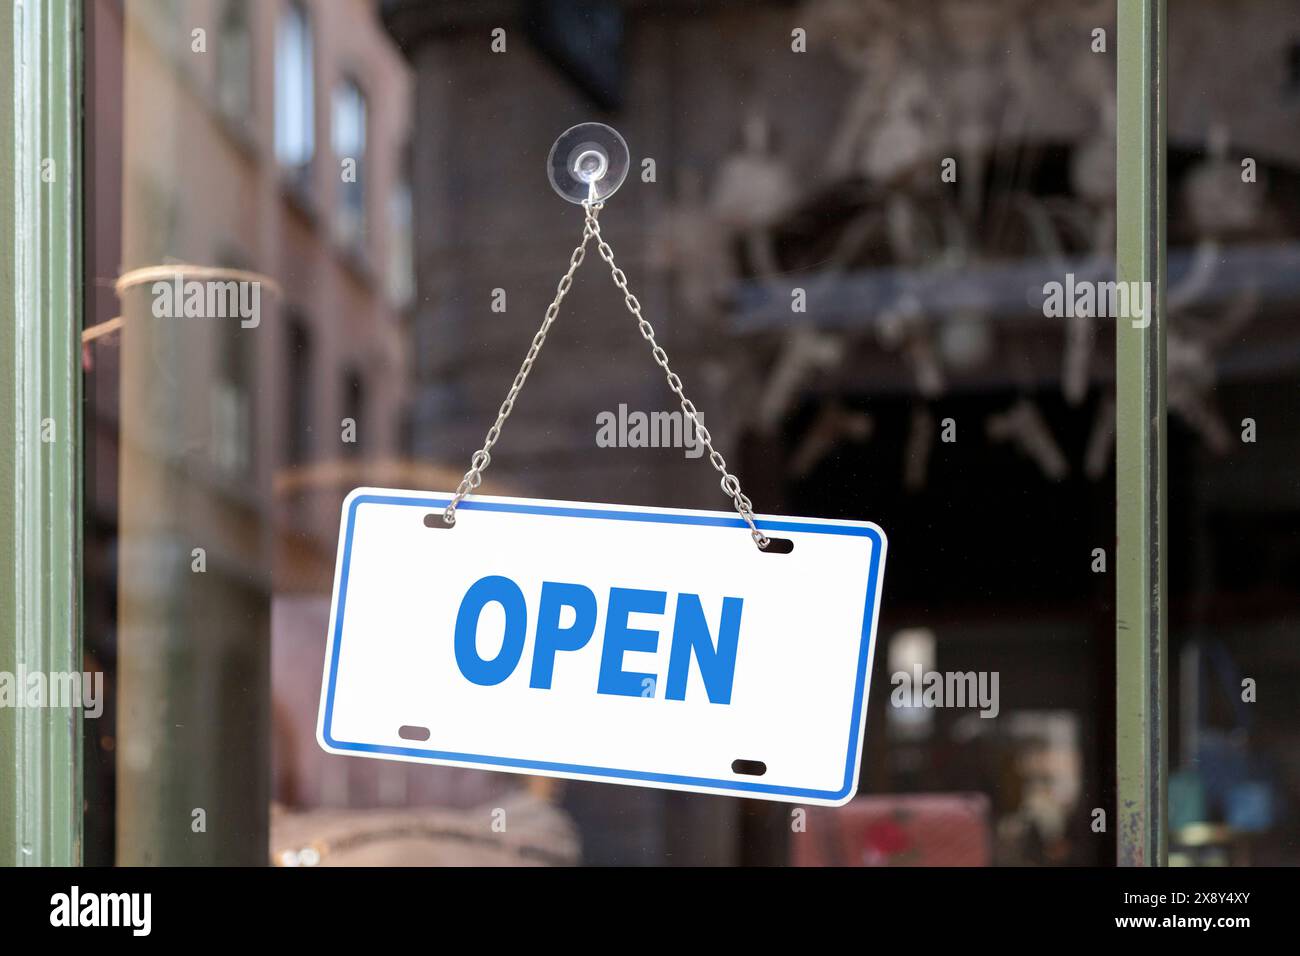 Close-up on an open sign in a window. Stock Photo